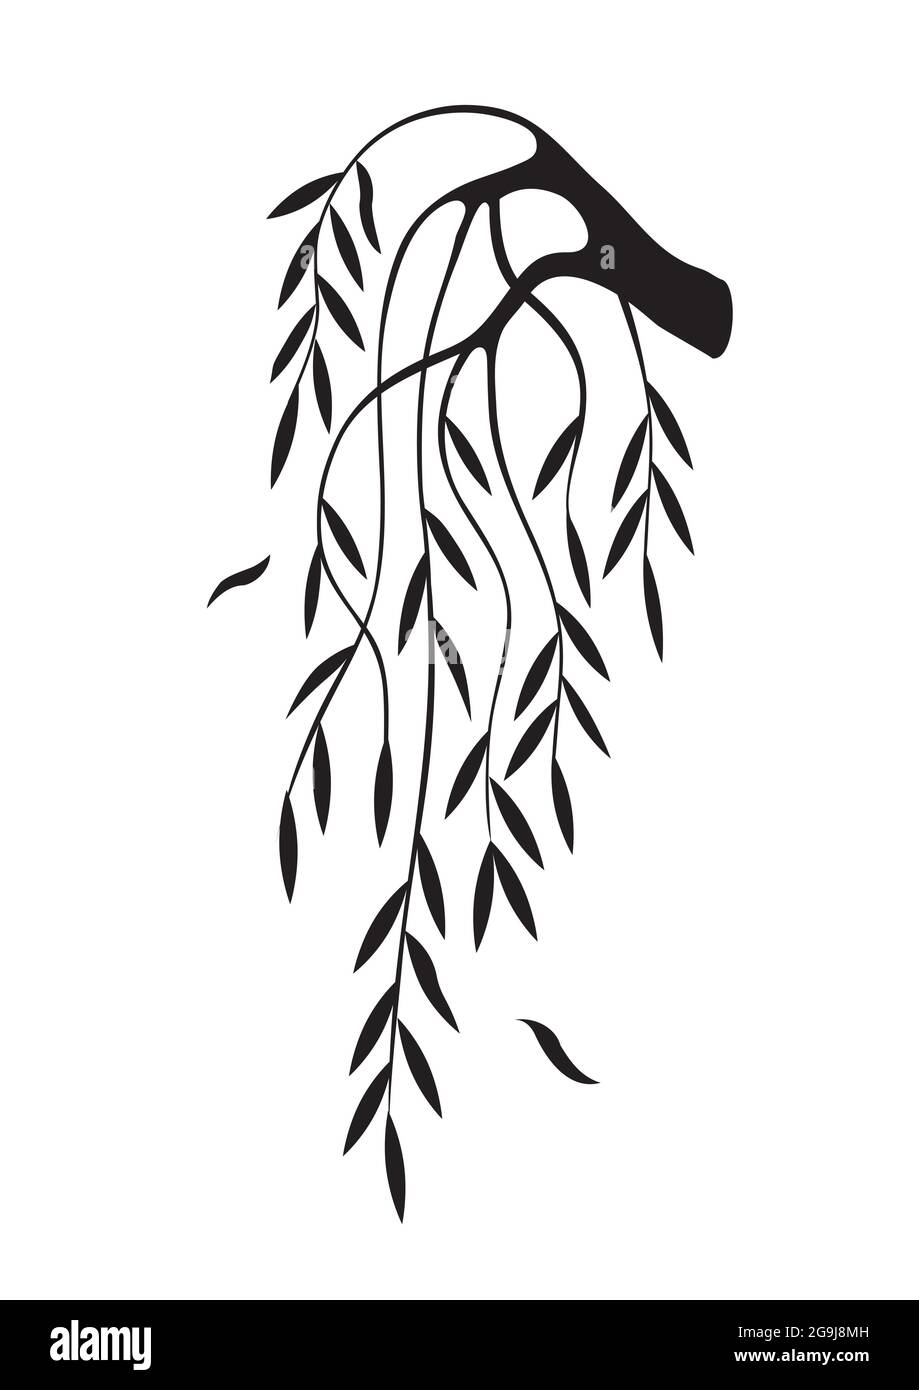 Weeping Willow tree branch silhouette. Illustration of melancholy motive. Isolated on white background. Vector available. Stock Vector